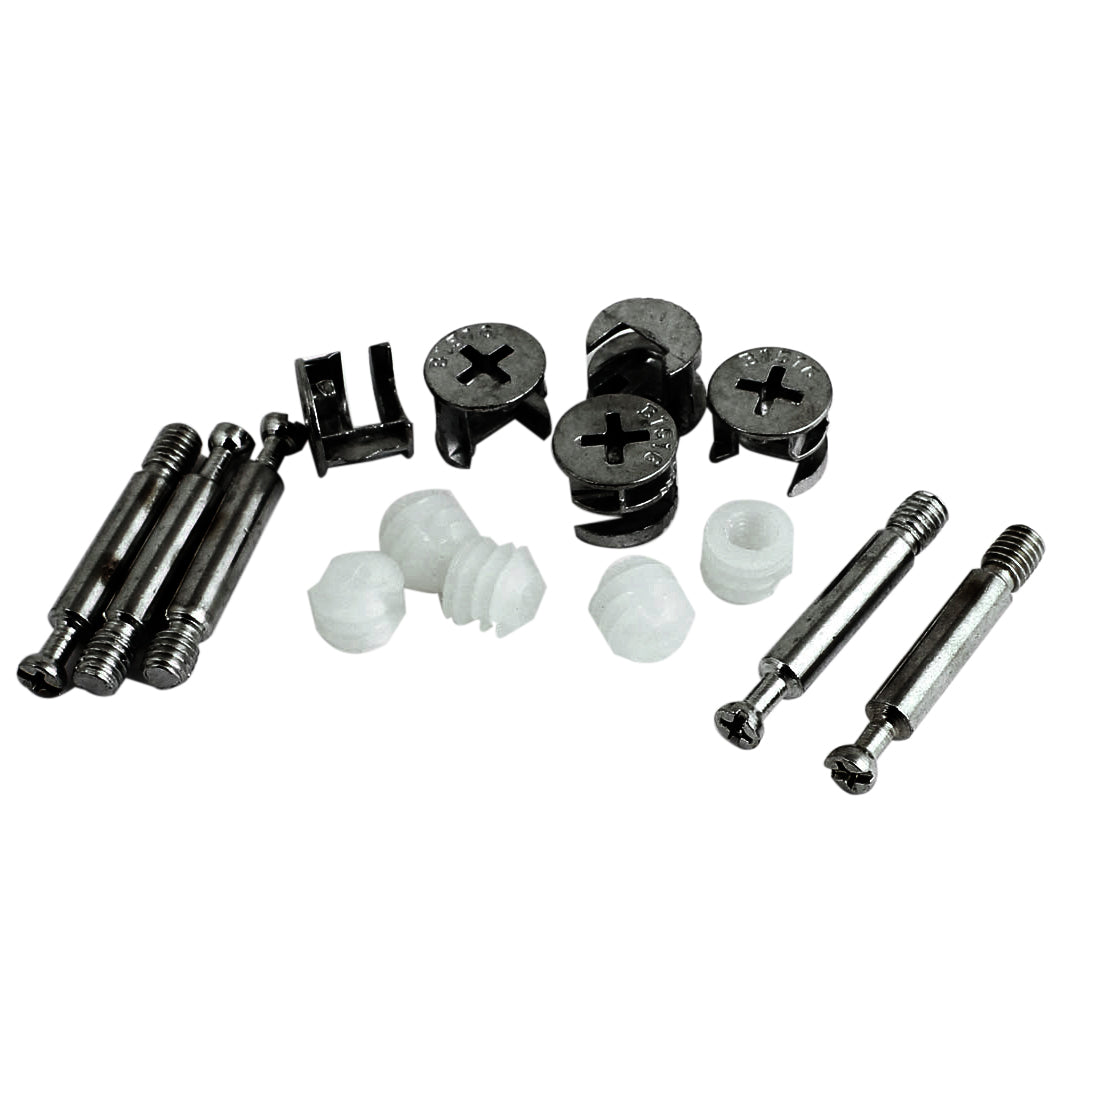 uxcell Uxcell Furniture Connecting Cam Fitting + Dowel + Pre-inserted Nut 5 Sets